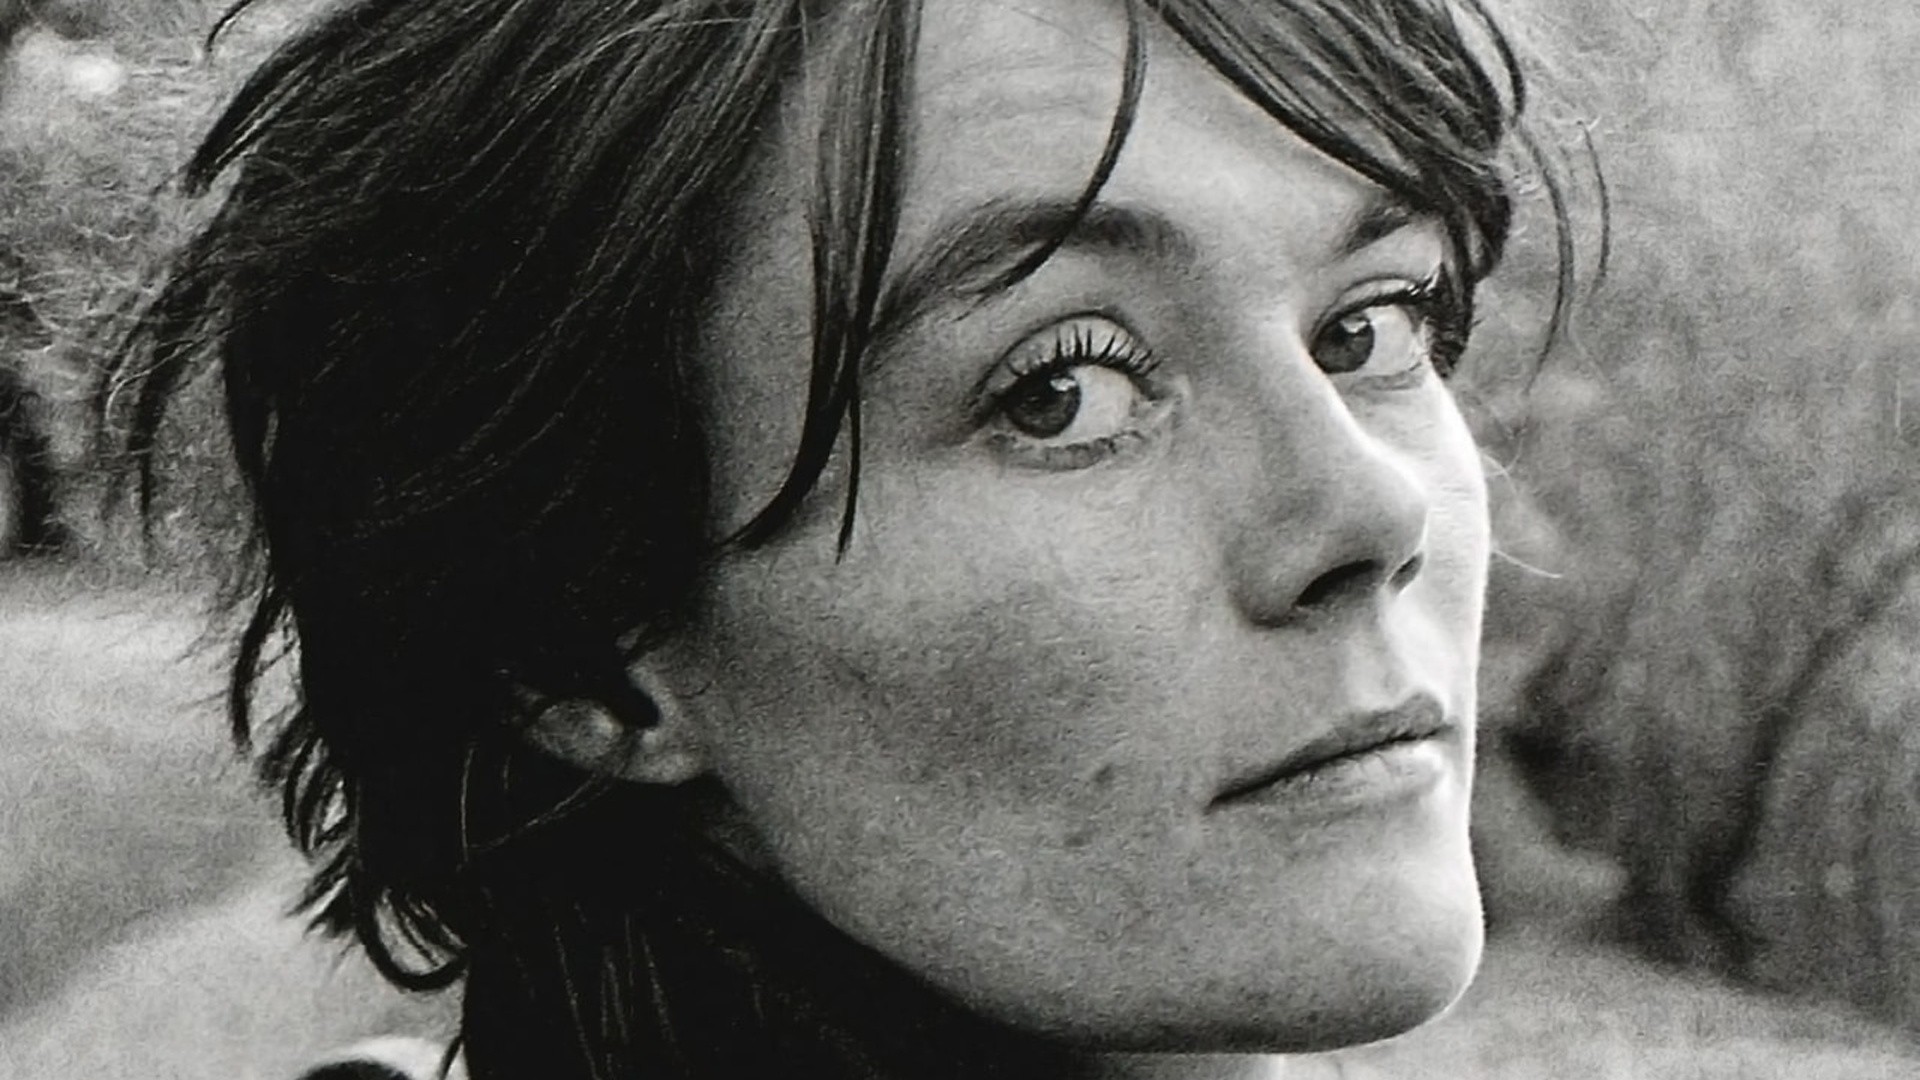 A black and white image of Tish Murtha staring directly at the camera.